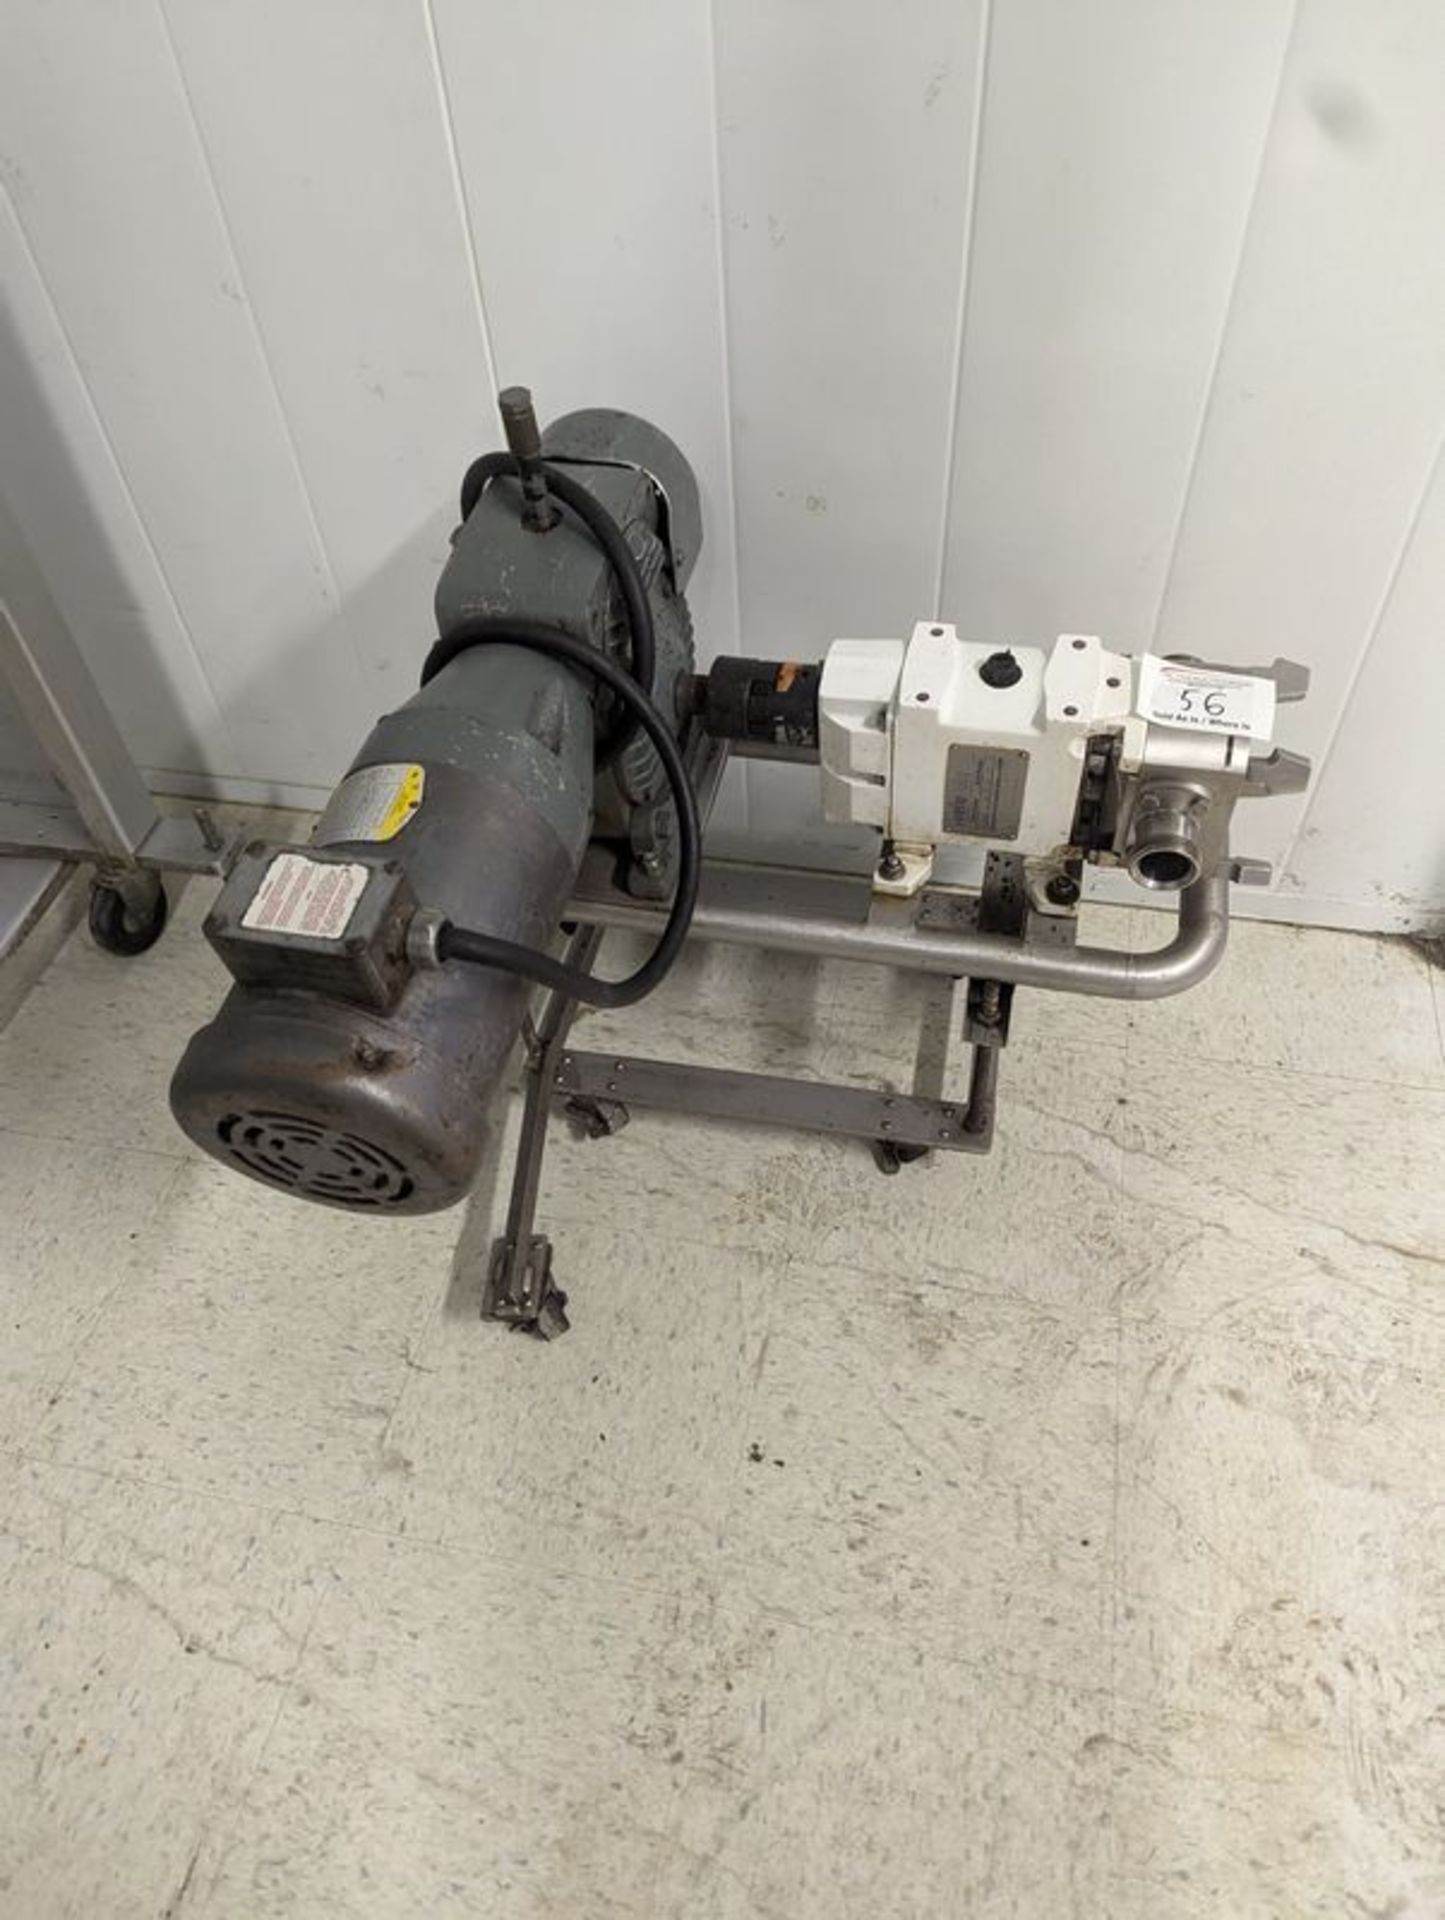 2hp Fluid Pump on Casters